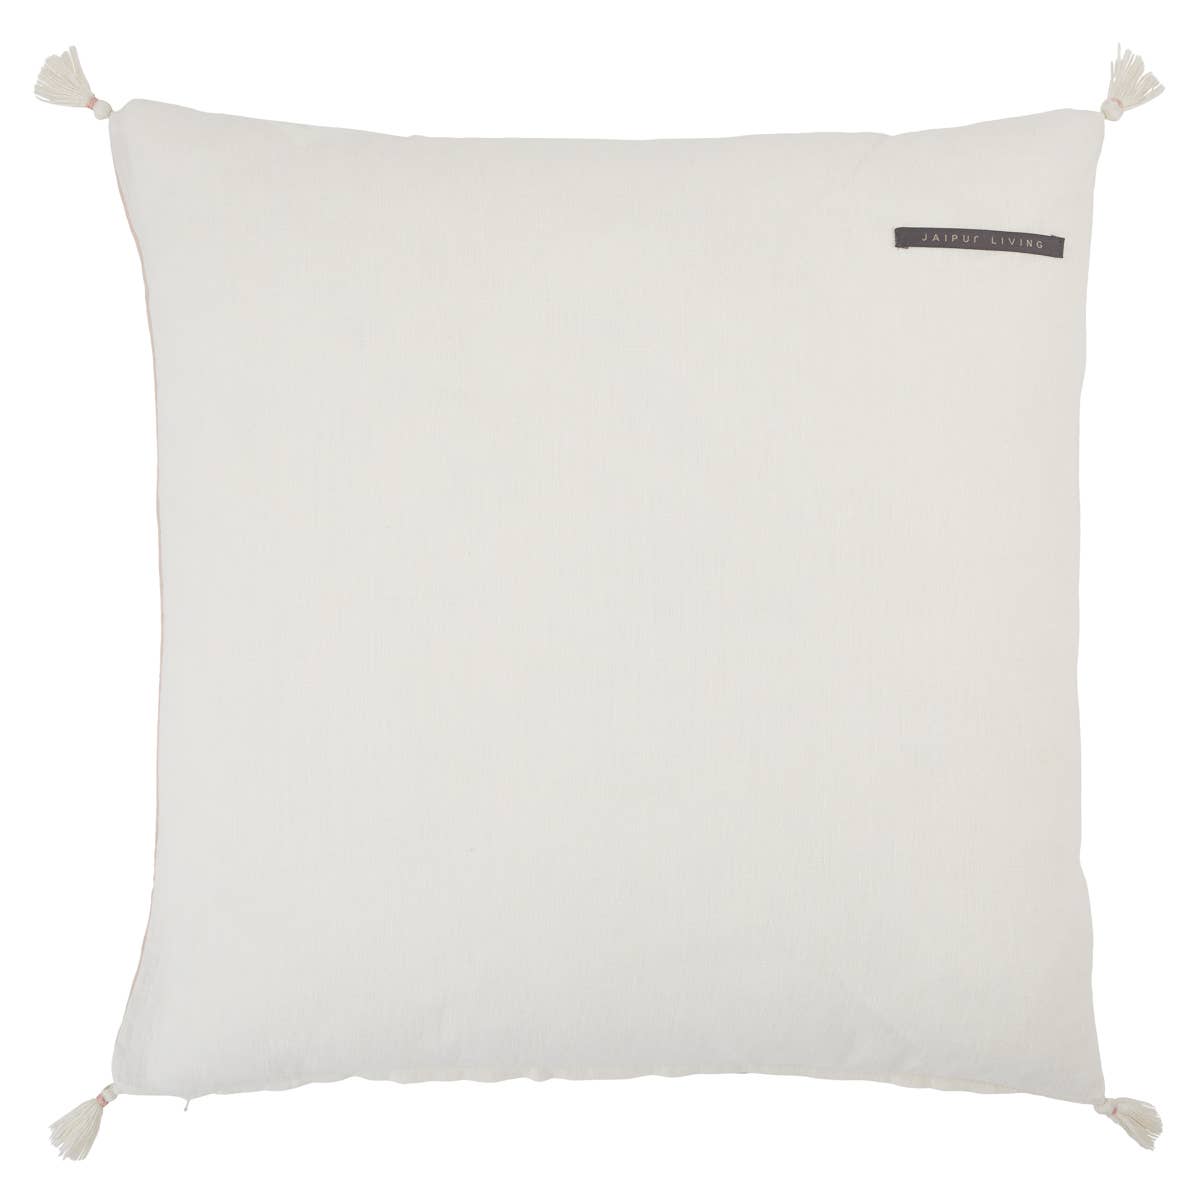 The Joya Pillow has cute tassels found on all four corners with a cute, detail stripe found in the middle. Place on your bed or sofa, this rose dust colored pillow will bring the whole room some texture and pop of color. Insert is made with 100% down.   Size: 22" x 22"  100% Linen Zipper Closure India  Professional Cleaning Recommended